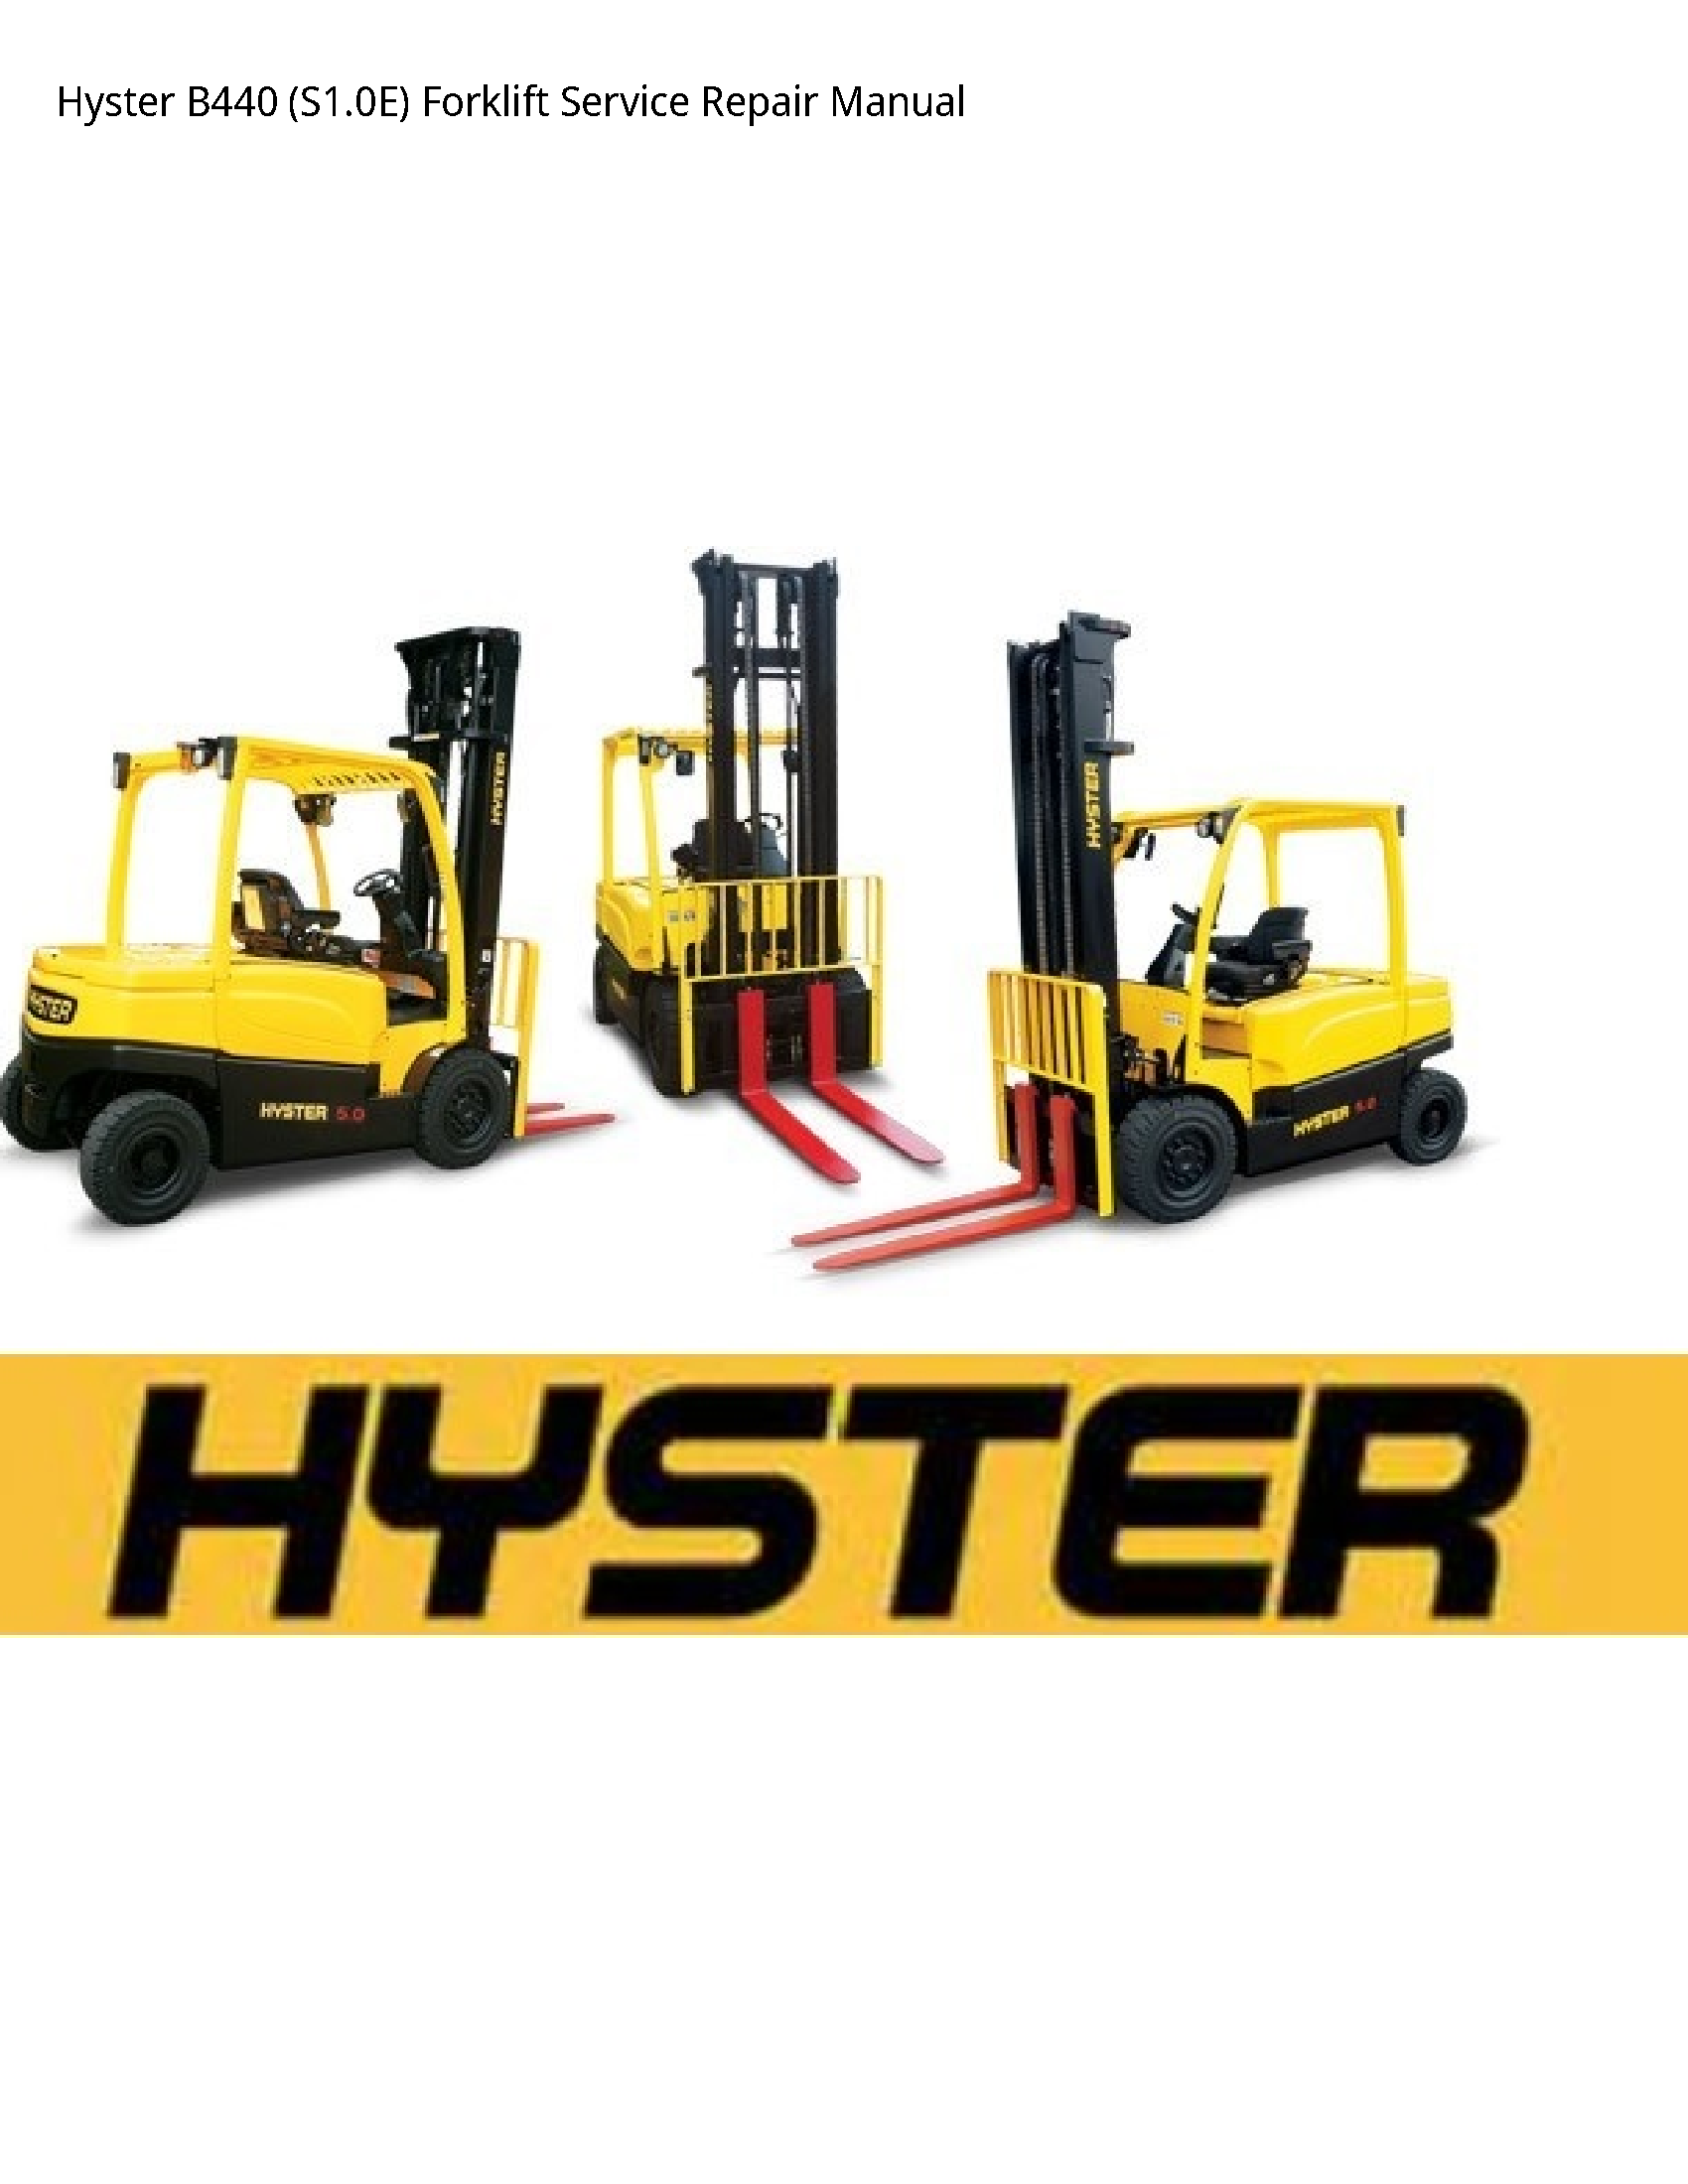 Hyster B440 Forklift manual